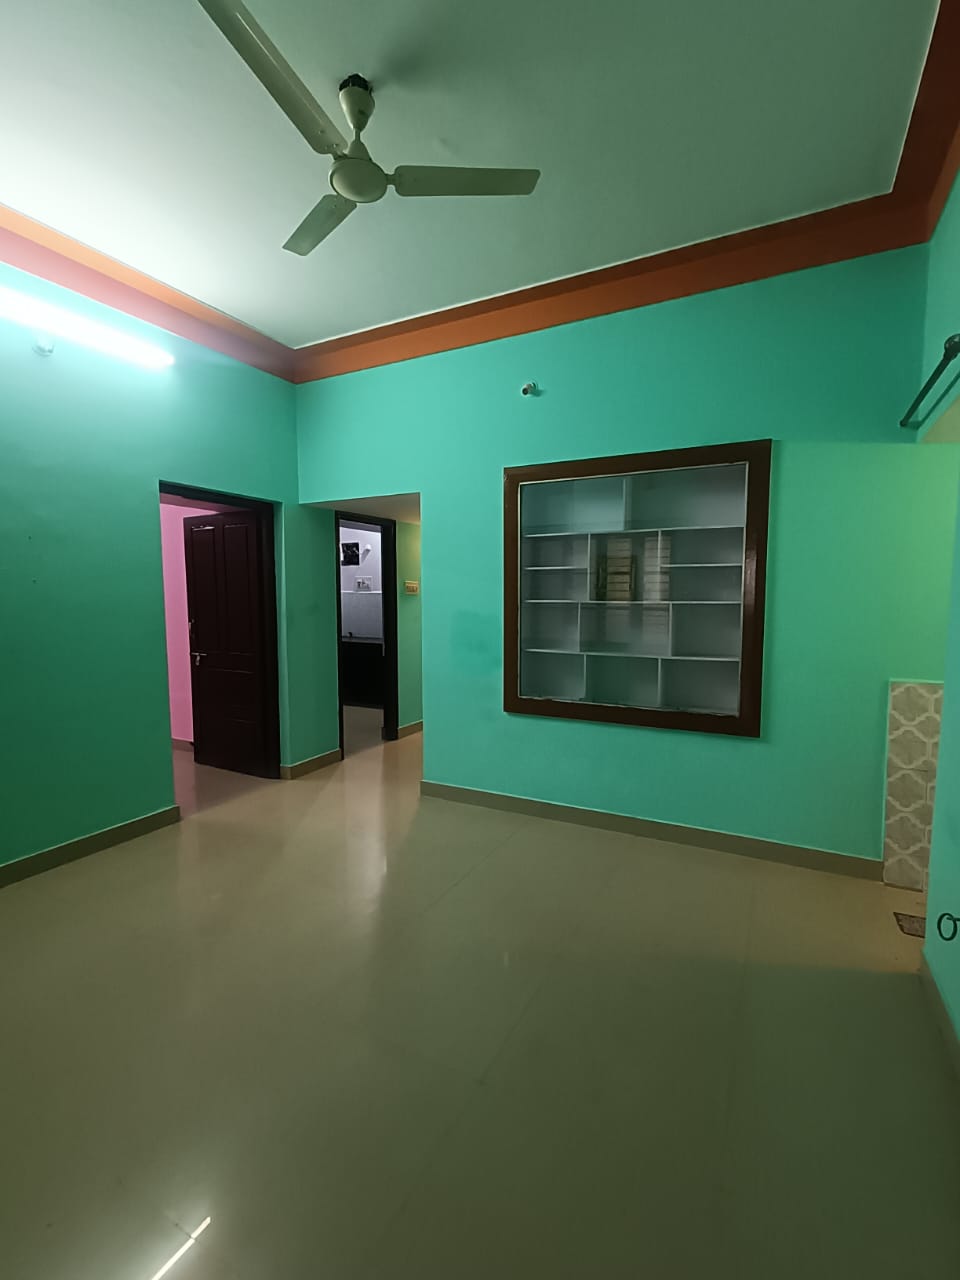 2 BHK Independent House for Lease Only at JAML2 - 367619lakh in Tejaswini Nagar